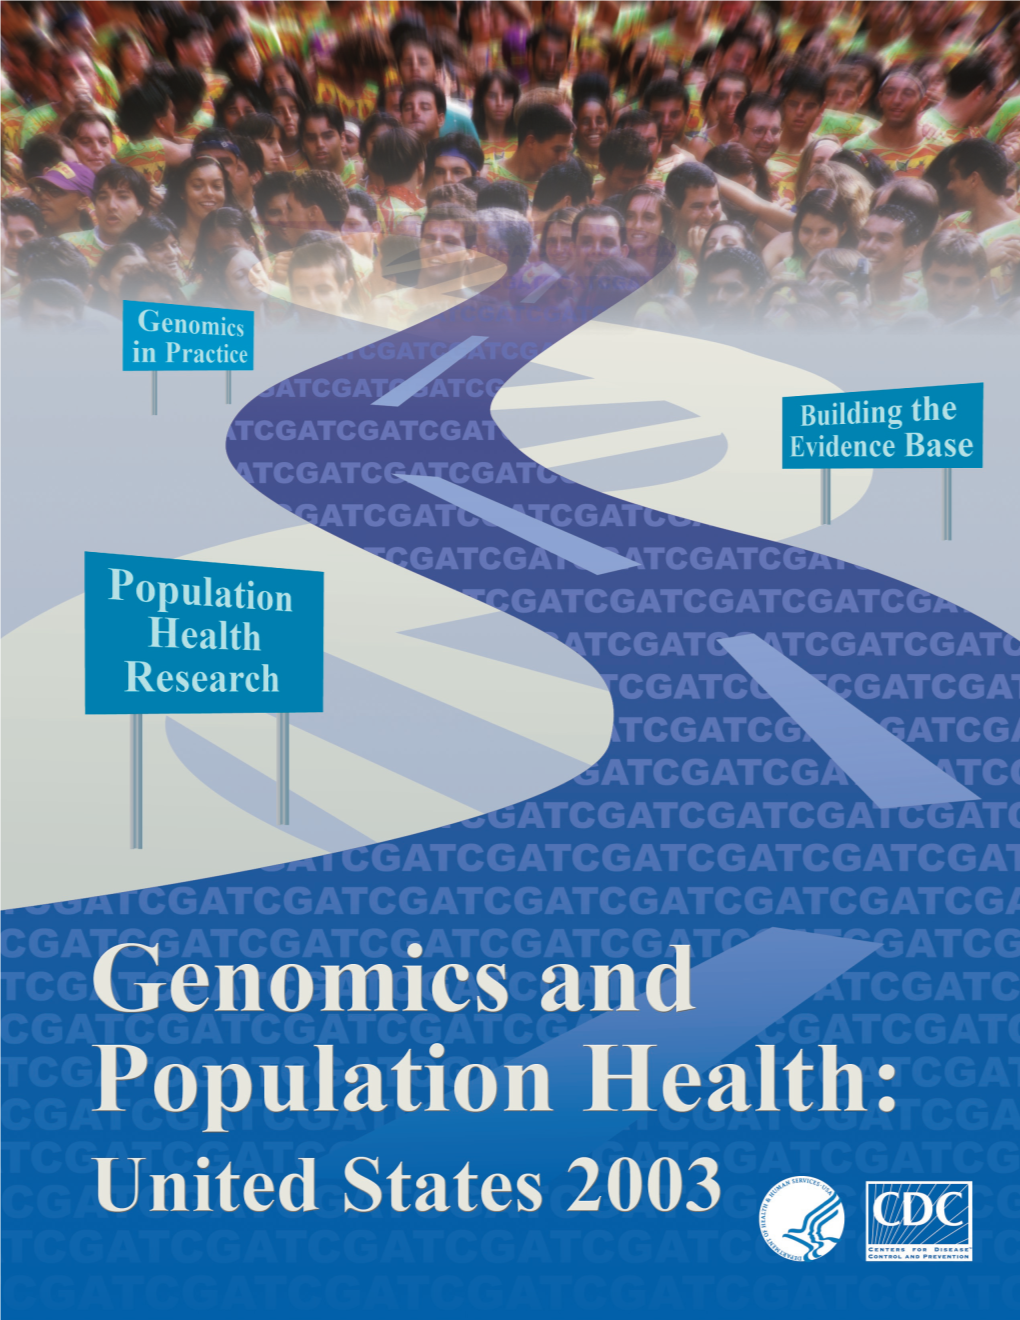 Genomics and Population Health: United States 2003, Visit Our Website At